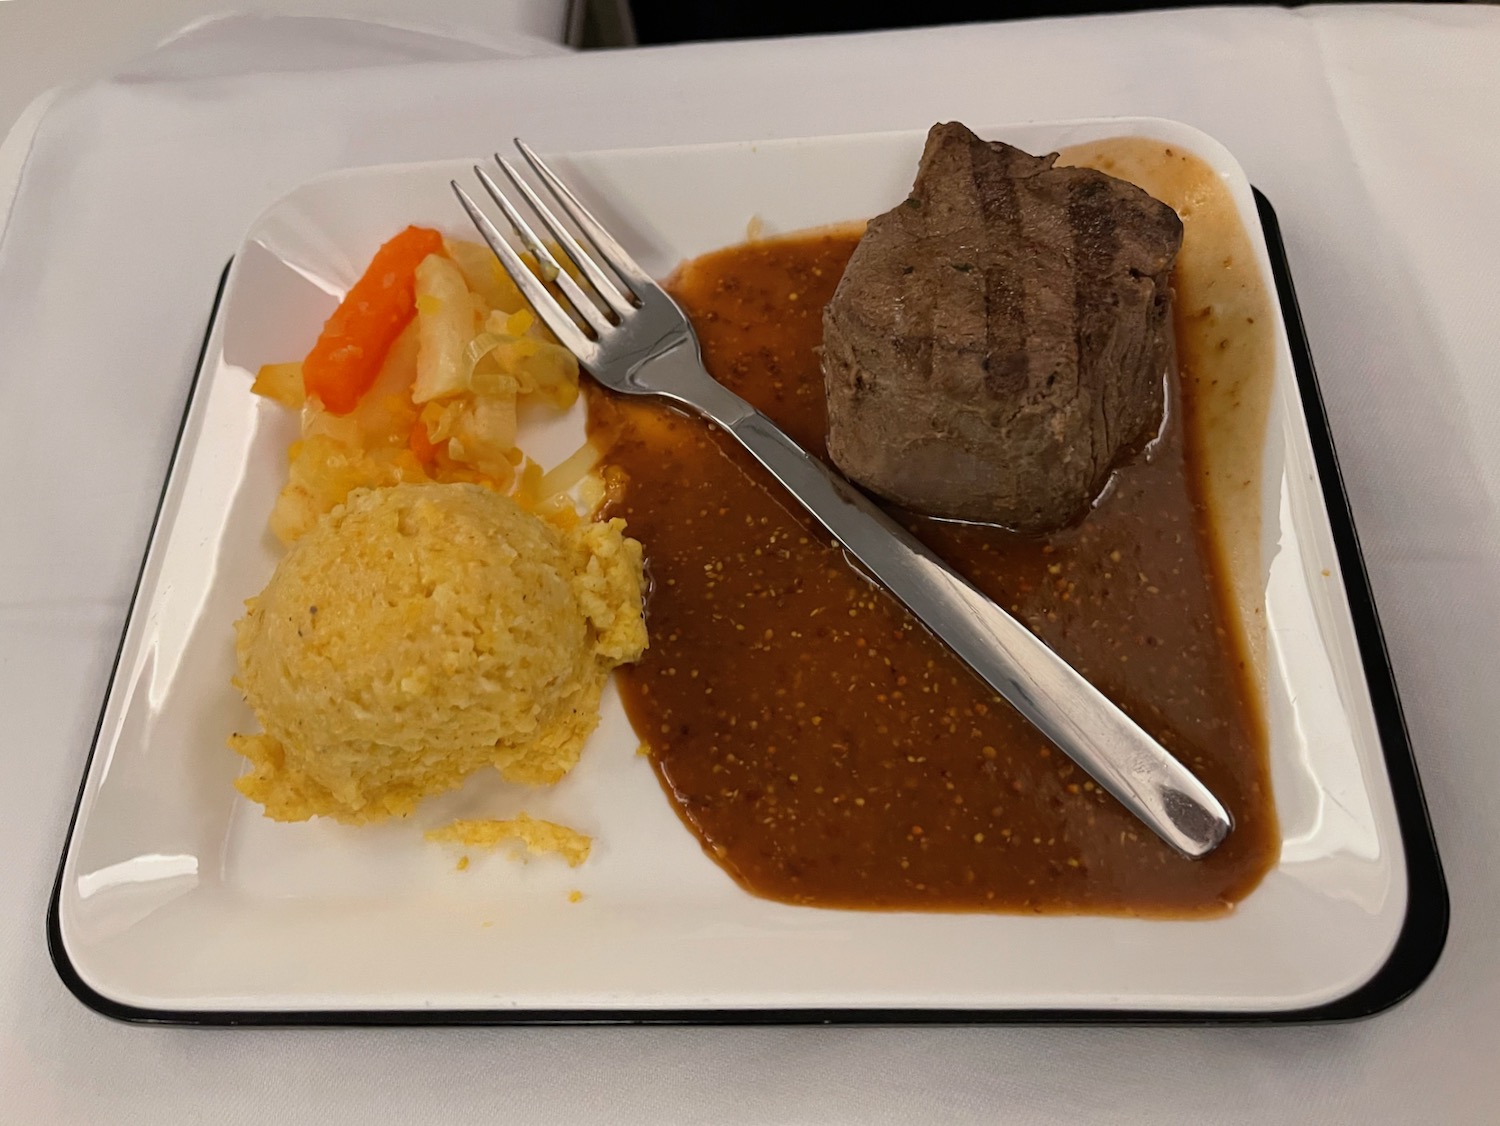 a plate of food with a fork and a knife